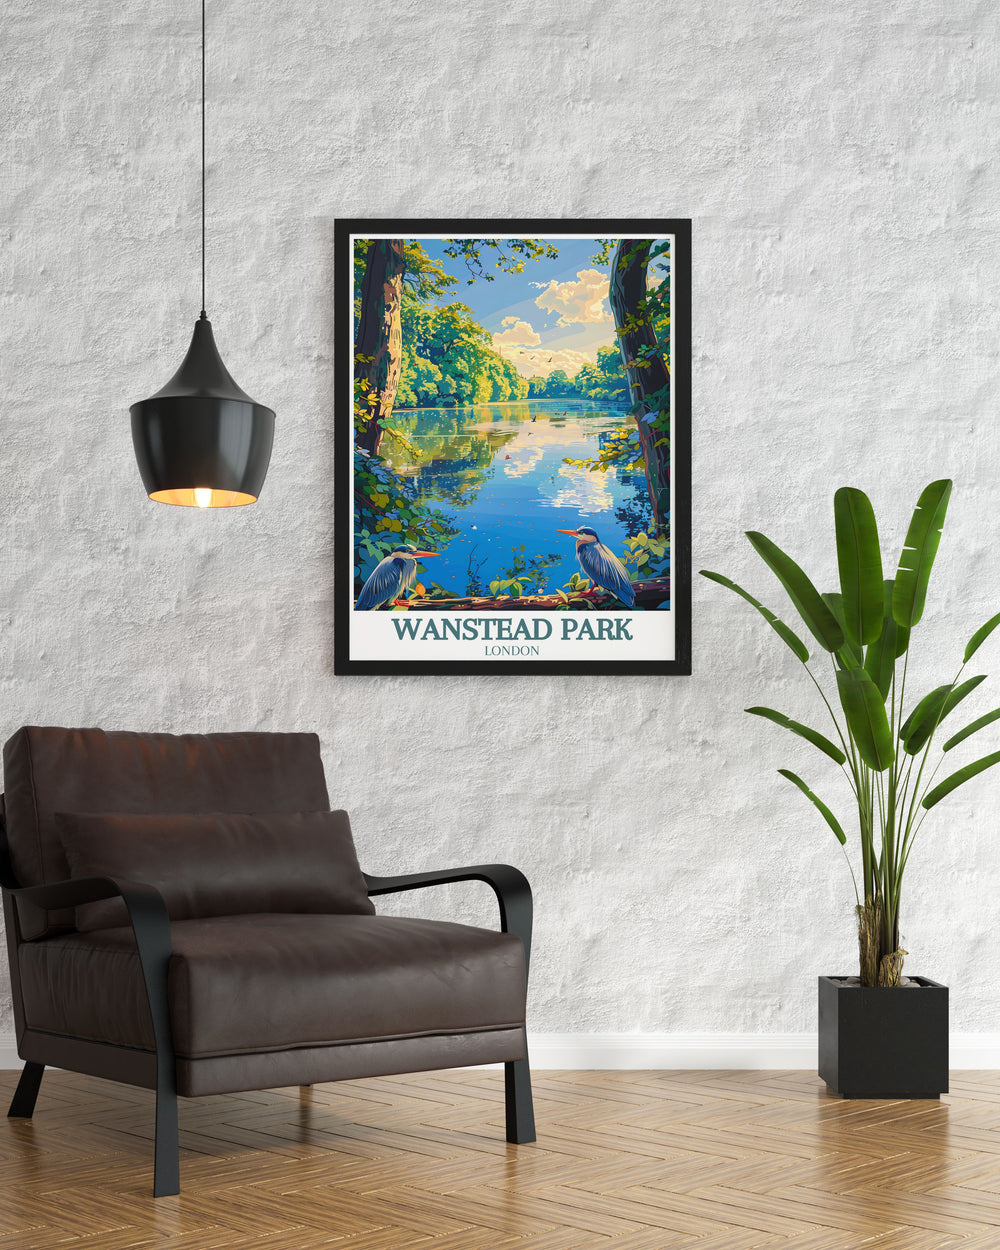 Beautiful Wanstead Park framed print highlighting the parks peaceful walking paths and vibrant flora. A must have for art enthusiasts who appreciate the natural charm of East Londons iconic green spaces.